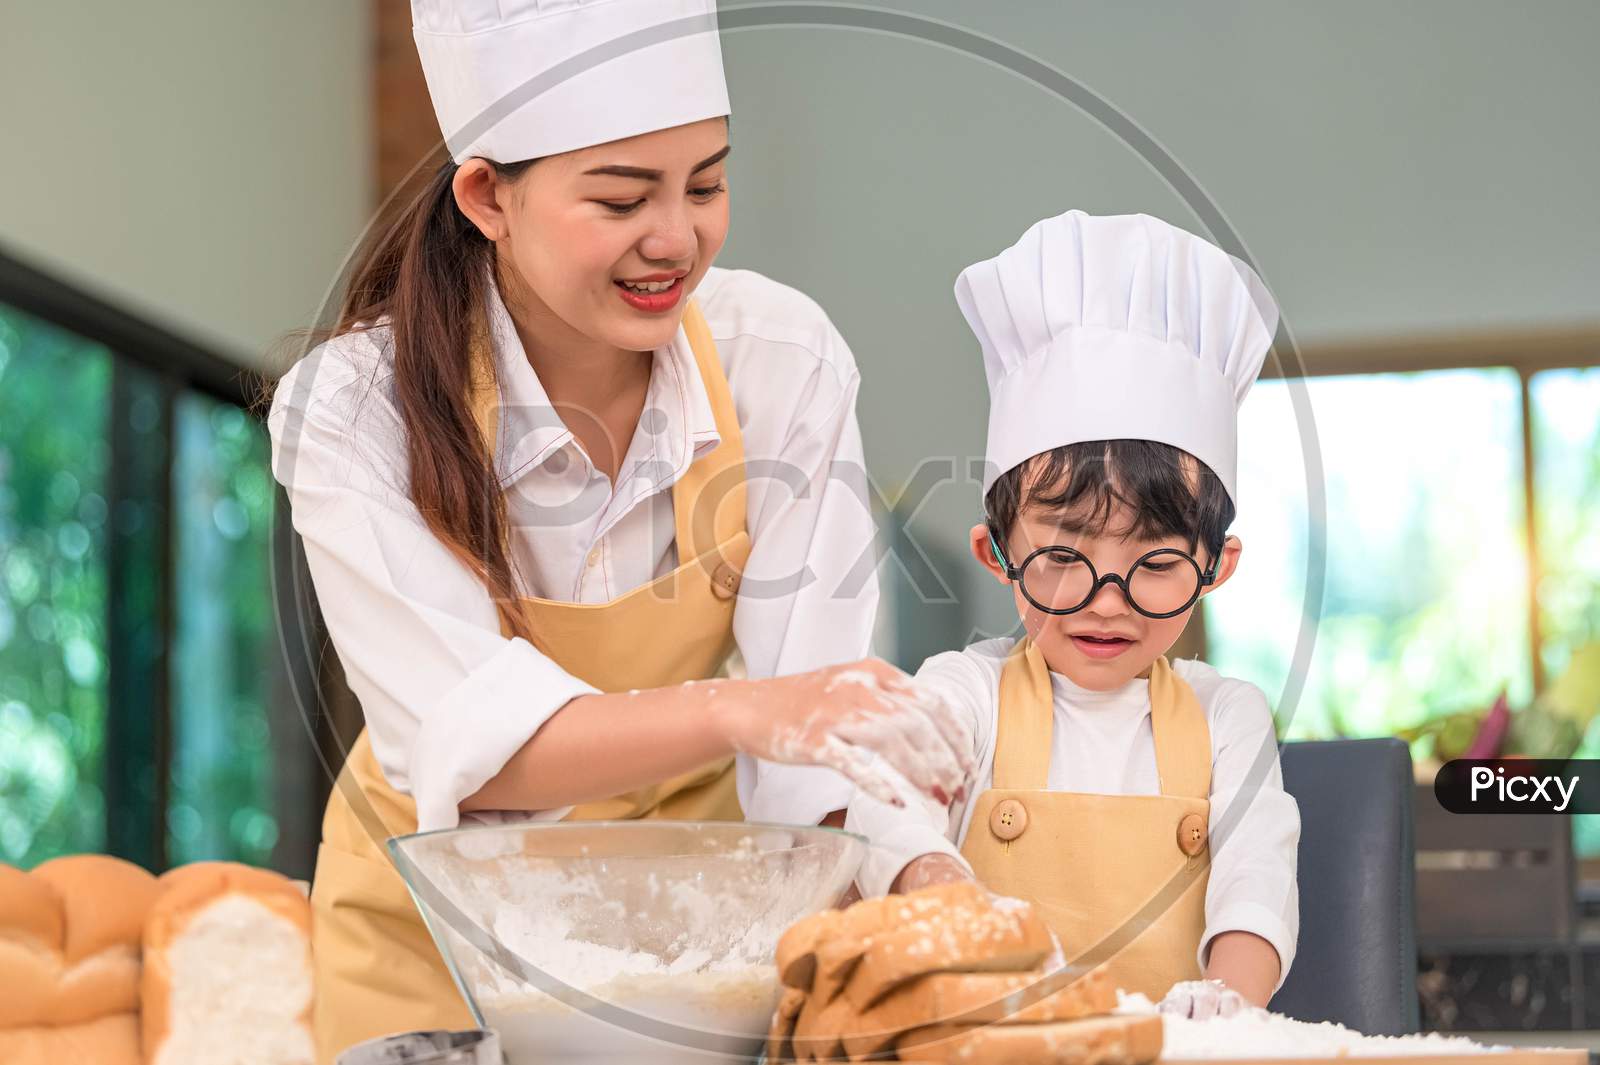 Beautiful Woman And Cute Little Asian Boy With Eyeglasses, Chef Hat And Apron Playing And Baking Bakery In Home Kitchen Funny. Homemade Food And Bread. Education And Learning Concept. Thai Person